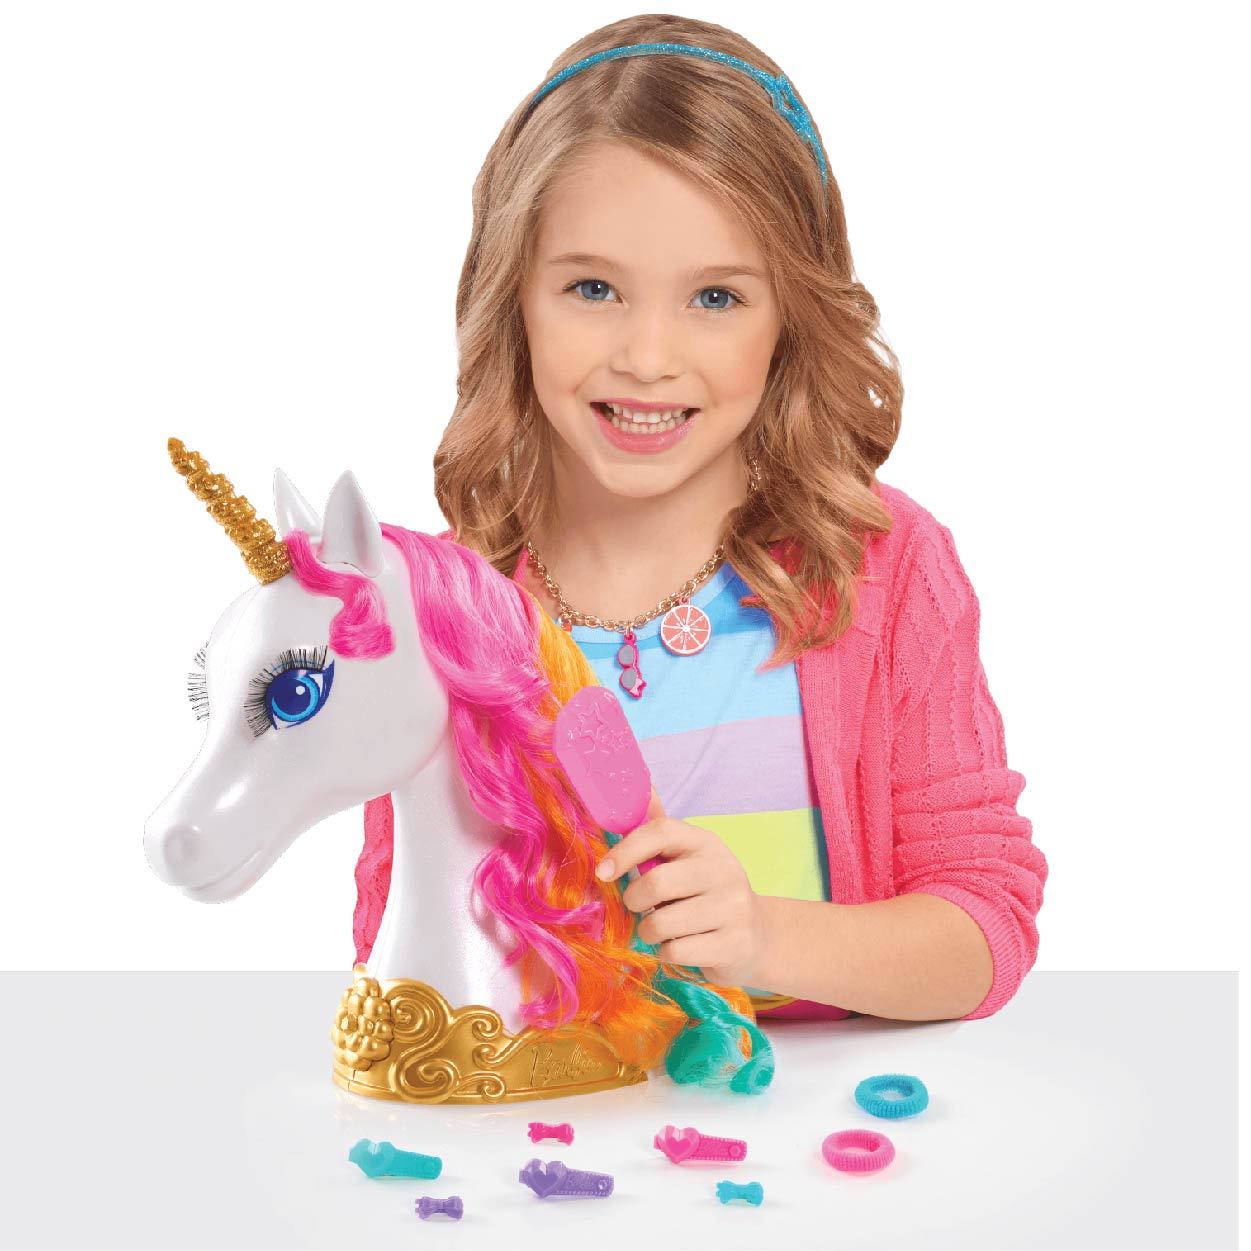 Barbie Dreamtopia 11-Piece Unicorn Styling Head,  Kids Toys for Ages 3 Up, Gifts and Presents - image 2 of 5